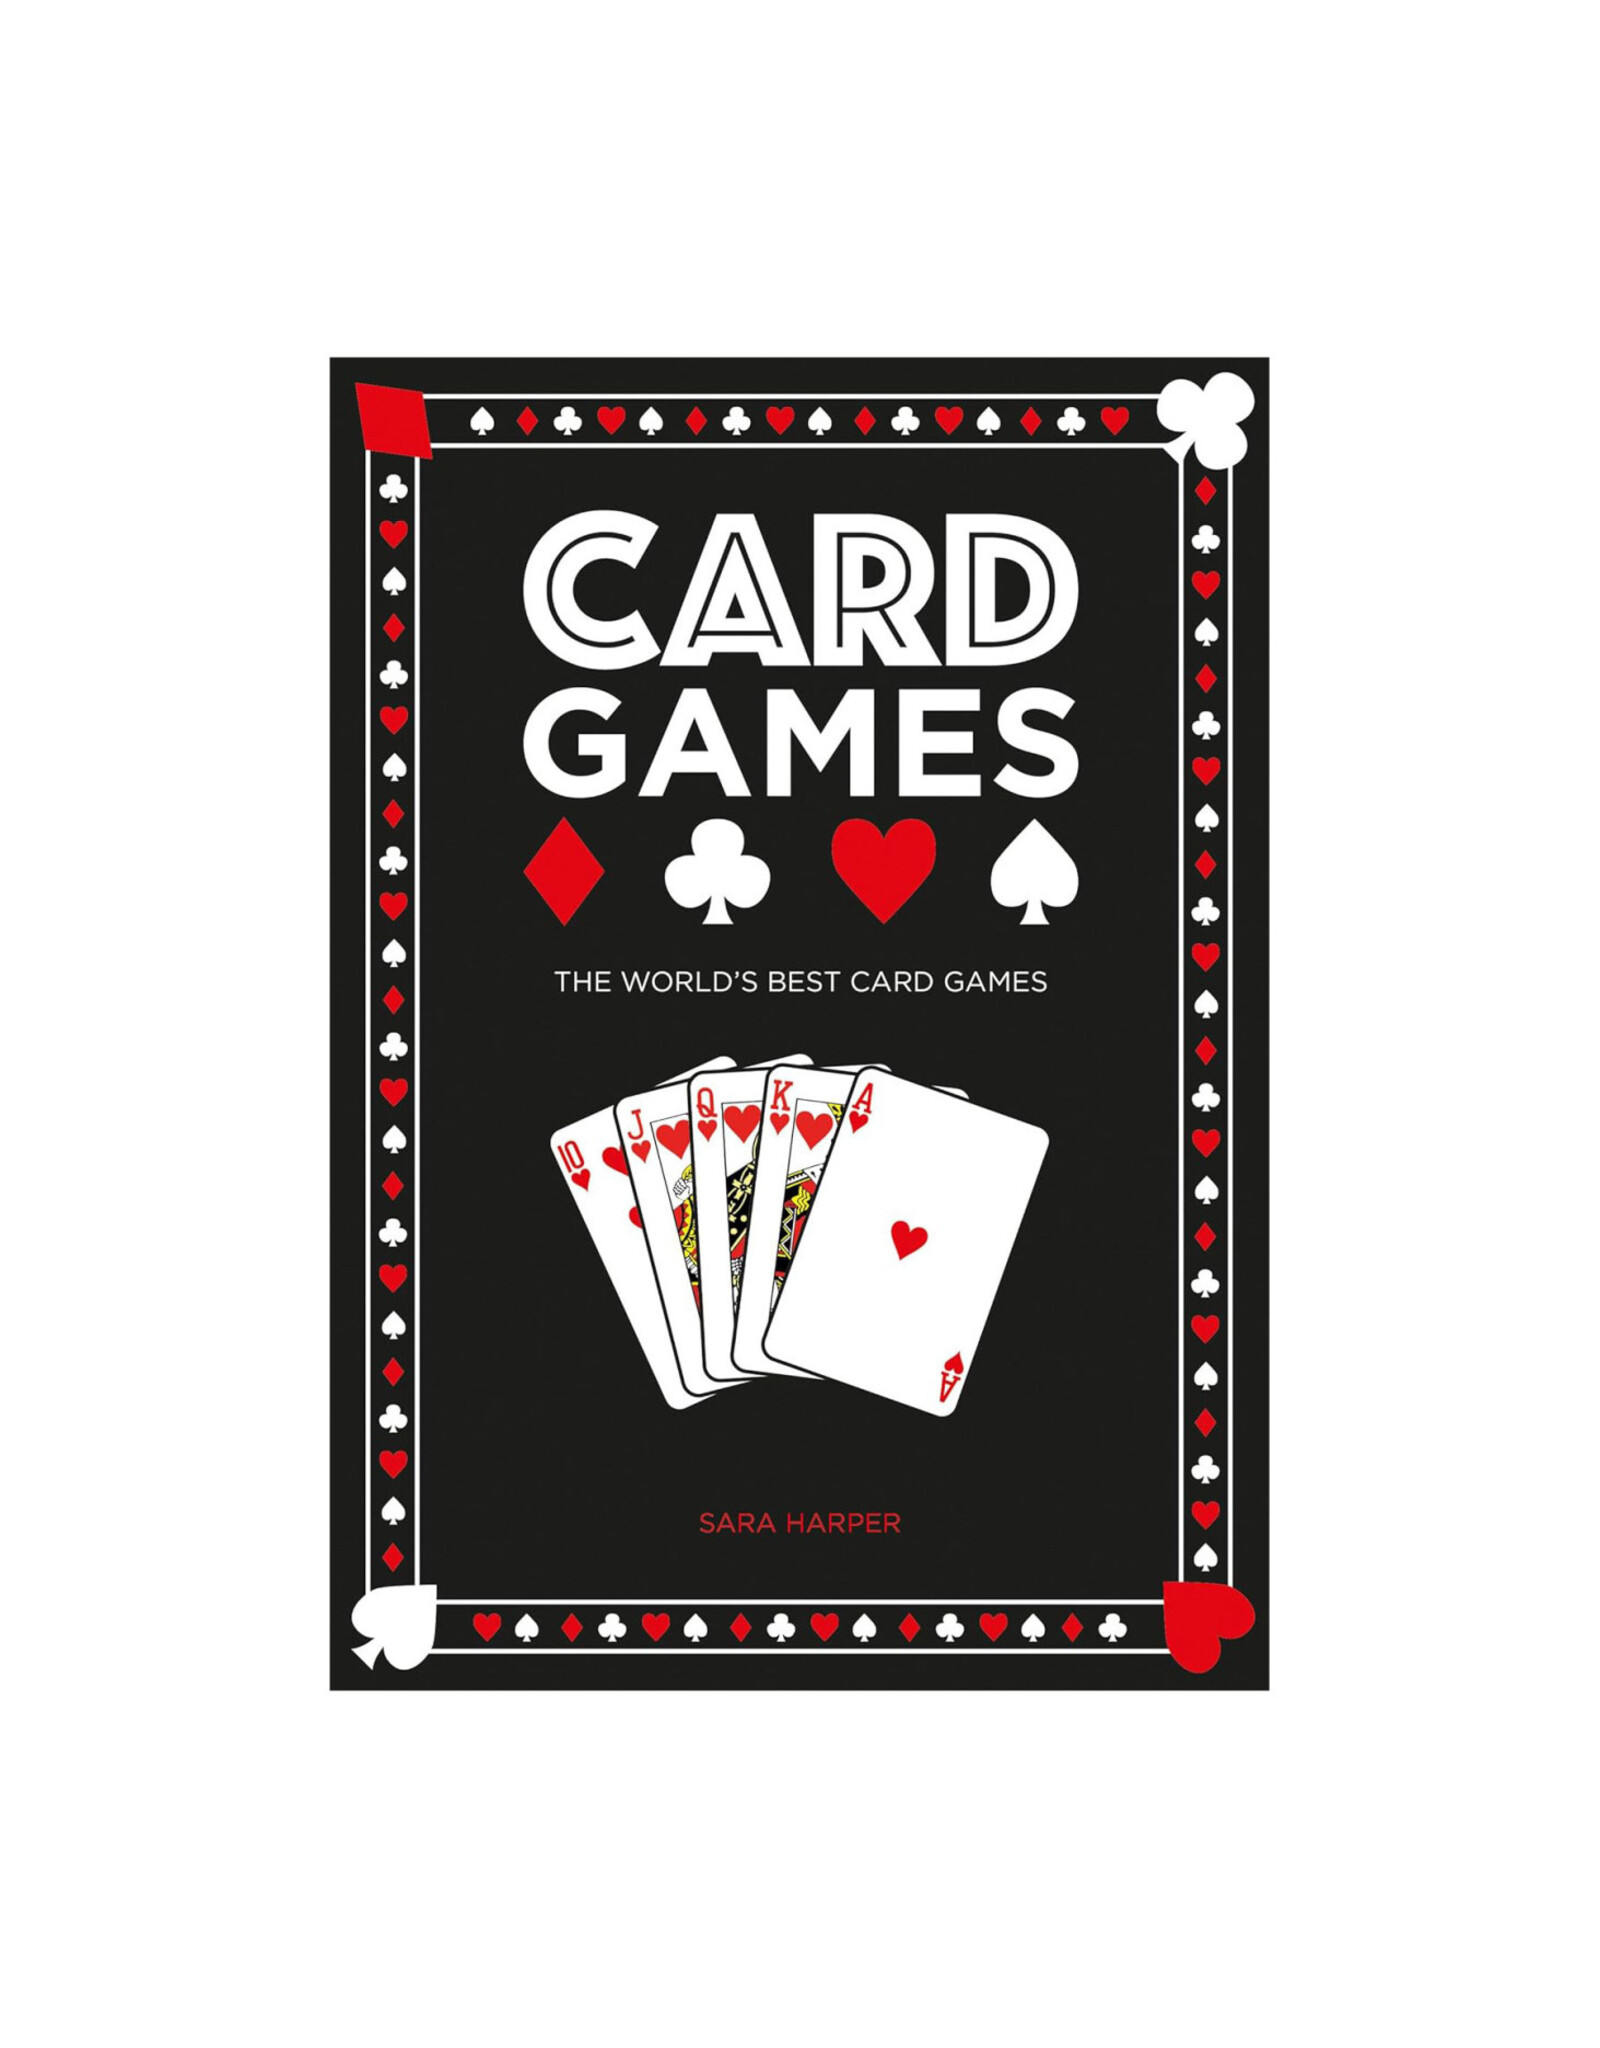 The World's Best Card Games